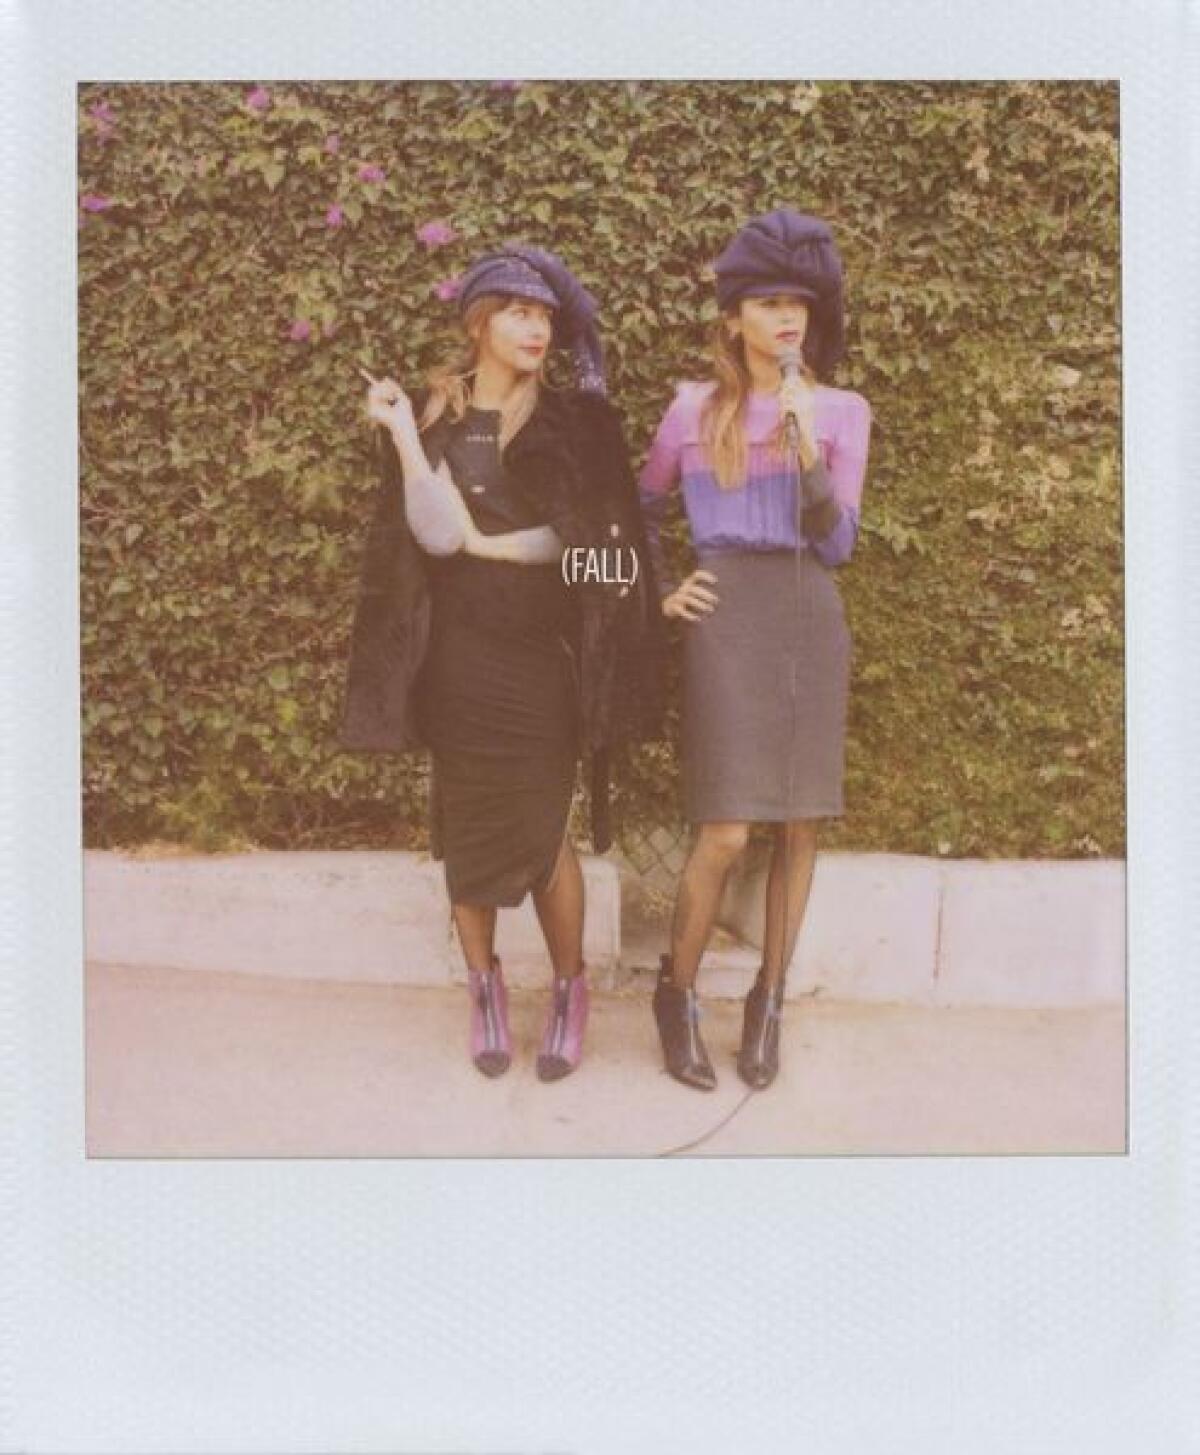 The Band of Outsiders fall 2013 women's ad campaign, featuring sisters Rashida, left, and Kidada Jones was shot using a Polaroid camera at the Dresden Restaurant in Los Angeles.